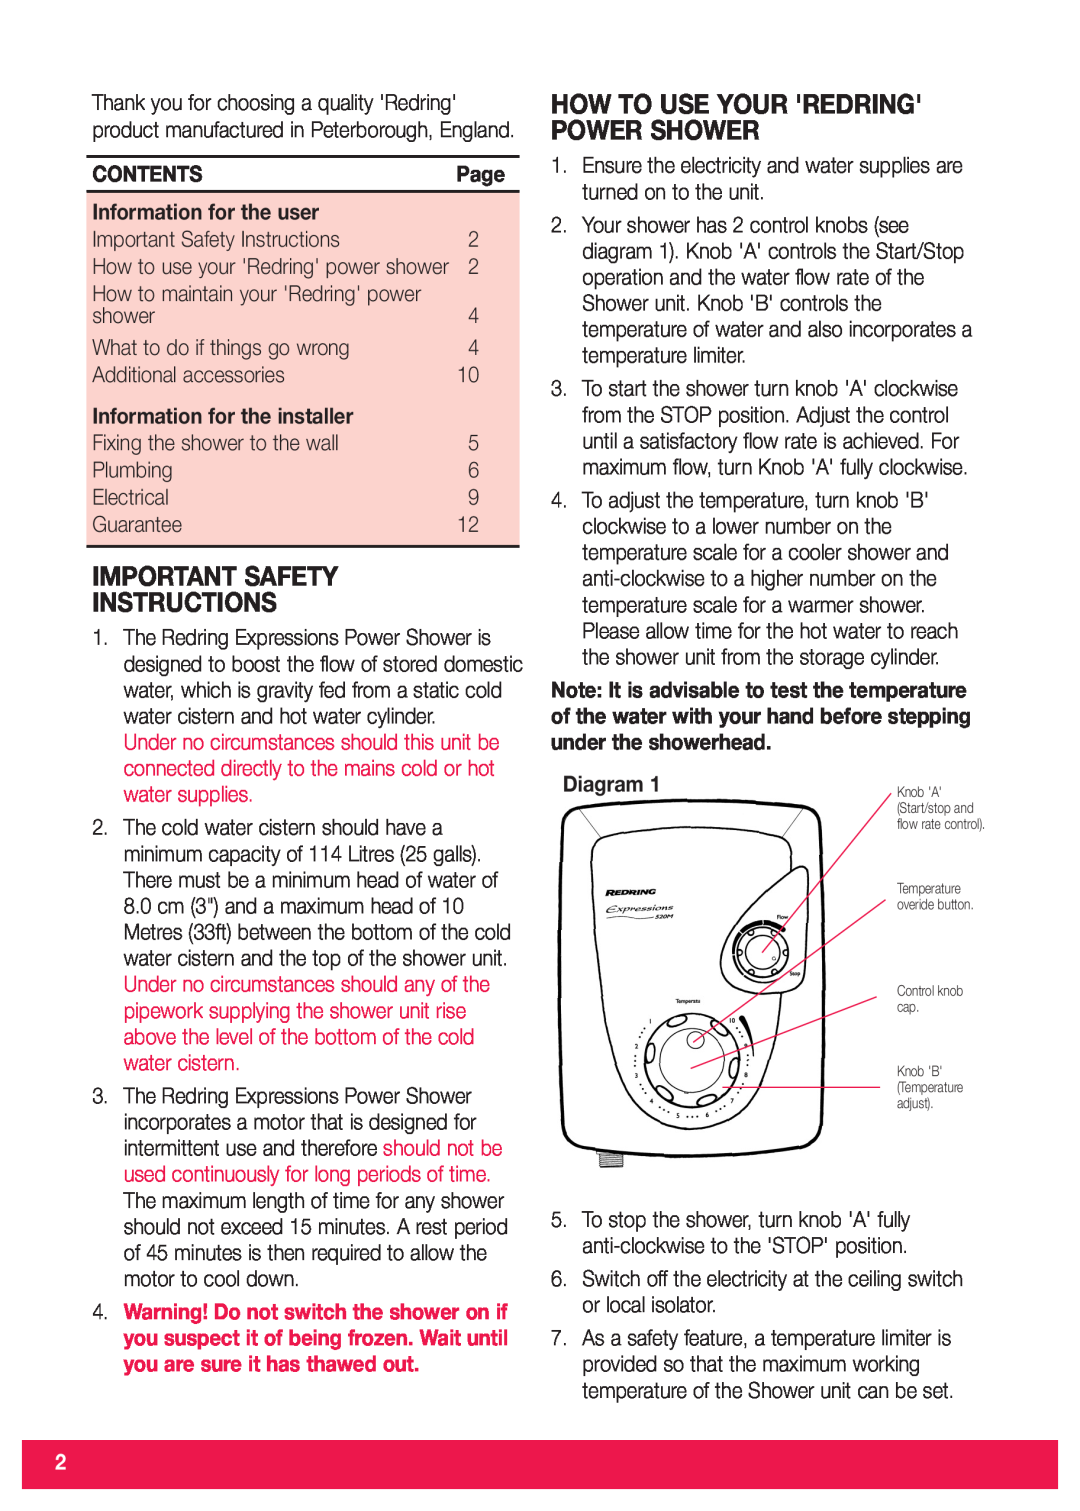 Redring 520TS Important Safety Instructions, Contents, Information for the user, Information for the installer, Diagram 